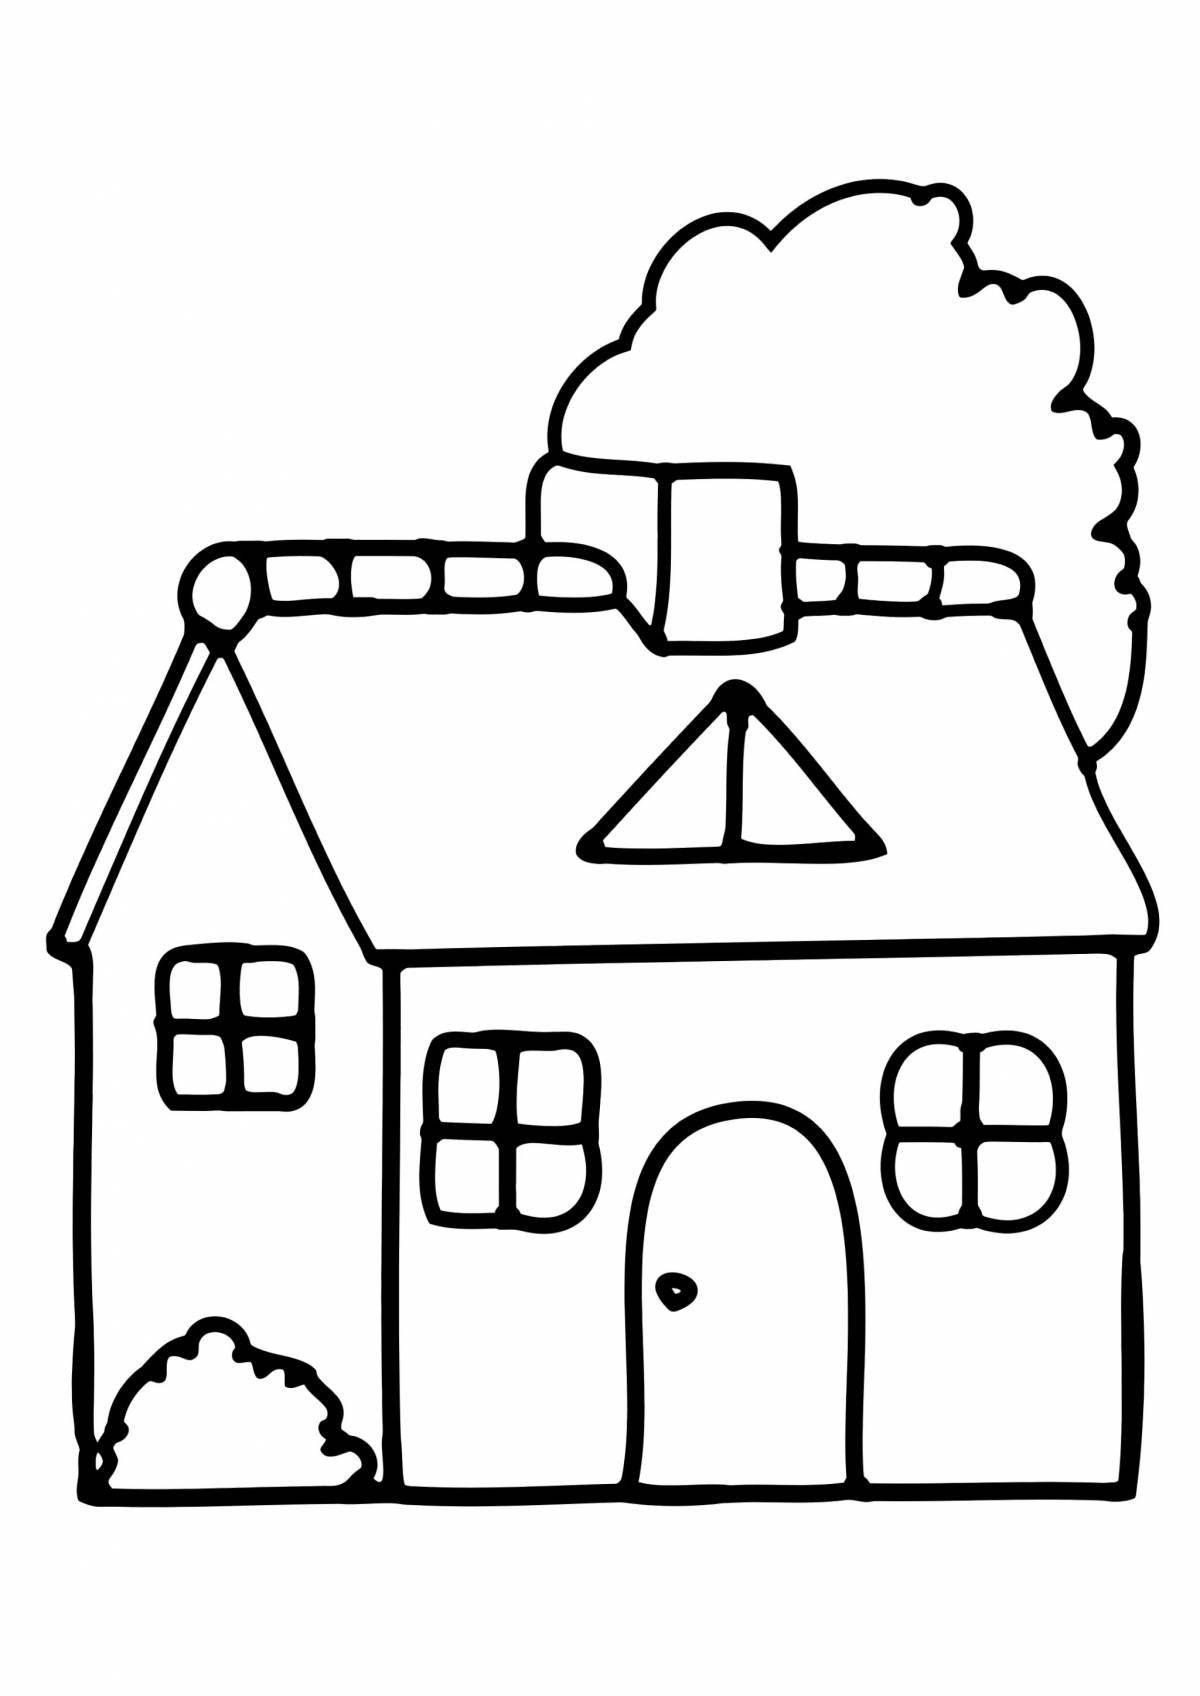 Adorable house coloring book for 2-3 year olds